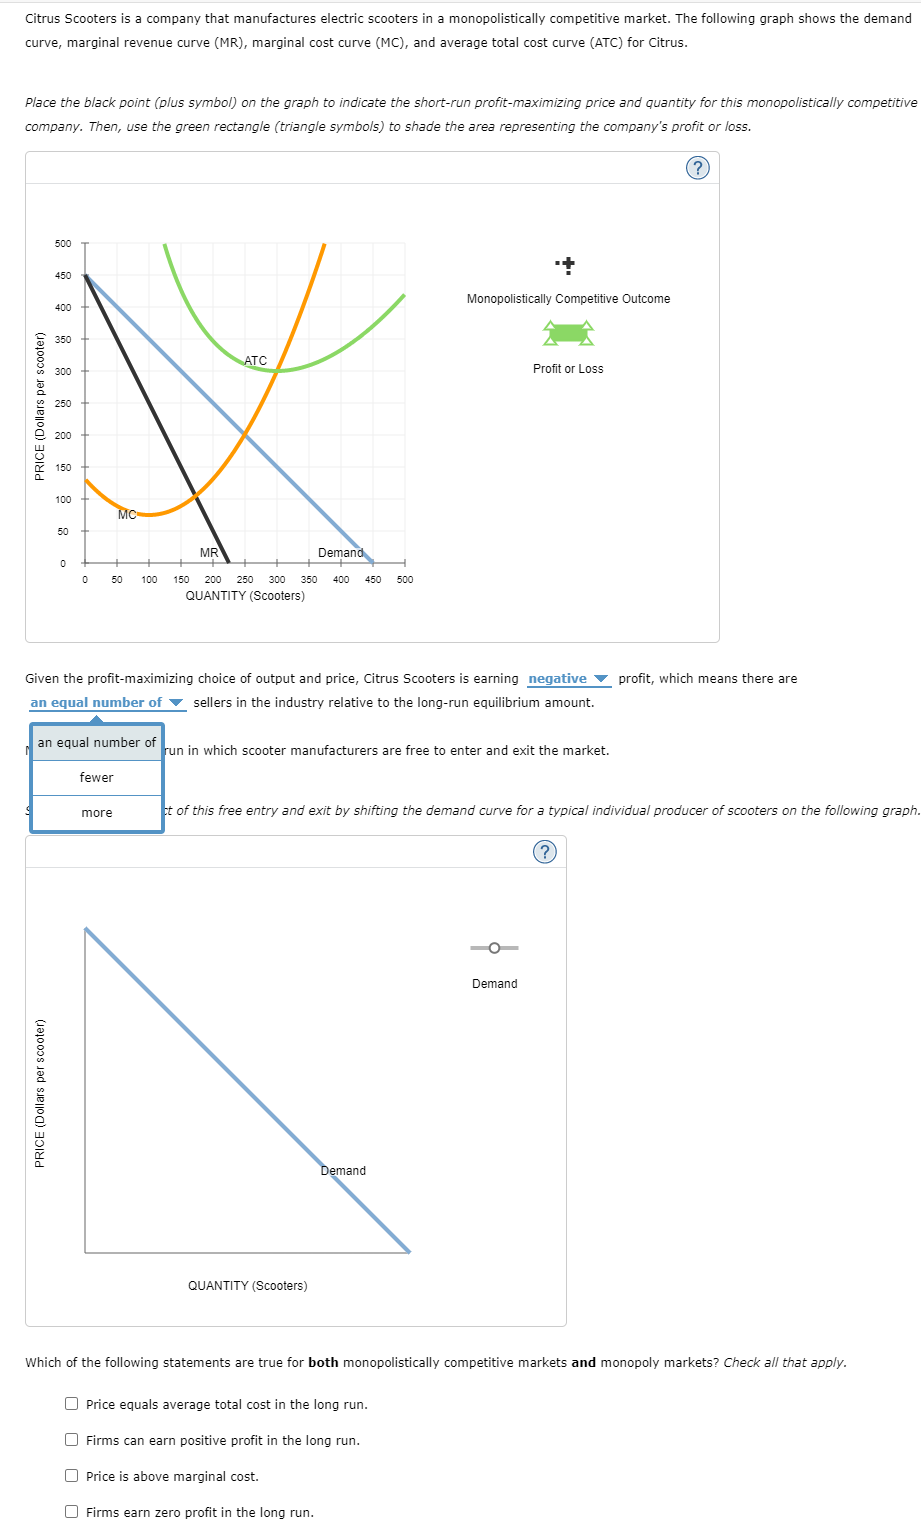 Citrus Scooters is a company that manufactures electric scooters in a monopolistically competitive market. The following graph shows the demand
curve, marginal revenue curve (MR), marginal cost curve (MC), and average total cost curve (ATC) for Citrus.
Place the black point (plus symbol) on the graph to indicate the short-run profit-maximizing price and quantity for this monopolistically competitive
company. Then, use the green rectangle (triangle symbols) to shade the area representing the company's profit or loss.
(?)
PRICE (Dollars per scooter)
500
450
PRICE (Dollars per scooter)
400
350
300
250
200
150
100
50
0
0
+ +
50
100
MC
an equal number of
fewer
more
ATC
Given the profit-maximizing choice of output and price, Citrus Scooters is earning negative profit, which means there are
an equal number of sellers in the industry relative to the long-run equilibrium amount.
MR
Demand
150 200 250 300 350 400 450 500
QUANTITY (Scooters)
run in which scooter manufacturers are free to enter and exit the market.
QUANTITY (Scooters)
ct of this free entry and exit by shifting the demand curve for a typical individual producer of scooters on the following graph.
Monopolistically Competitive Outcome
Demand
Price equals average total cost in the long run.
Firms can earn positive profit in the long run.
Price is above marginal cost.
Firms earn zero profit in the long run.
Profit or Loss
¦
Demand
Which of the following statements are true for both monopolistically competitive markets and monopoly markets? Check all that apply.
(?)